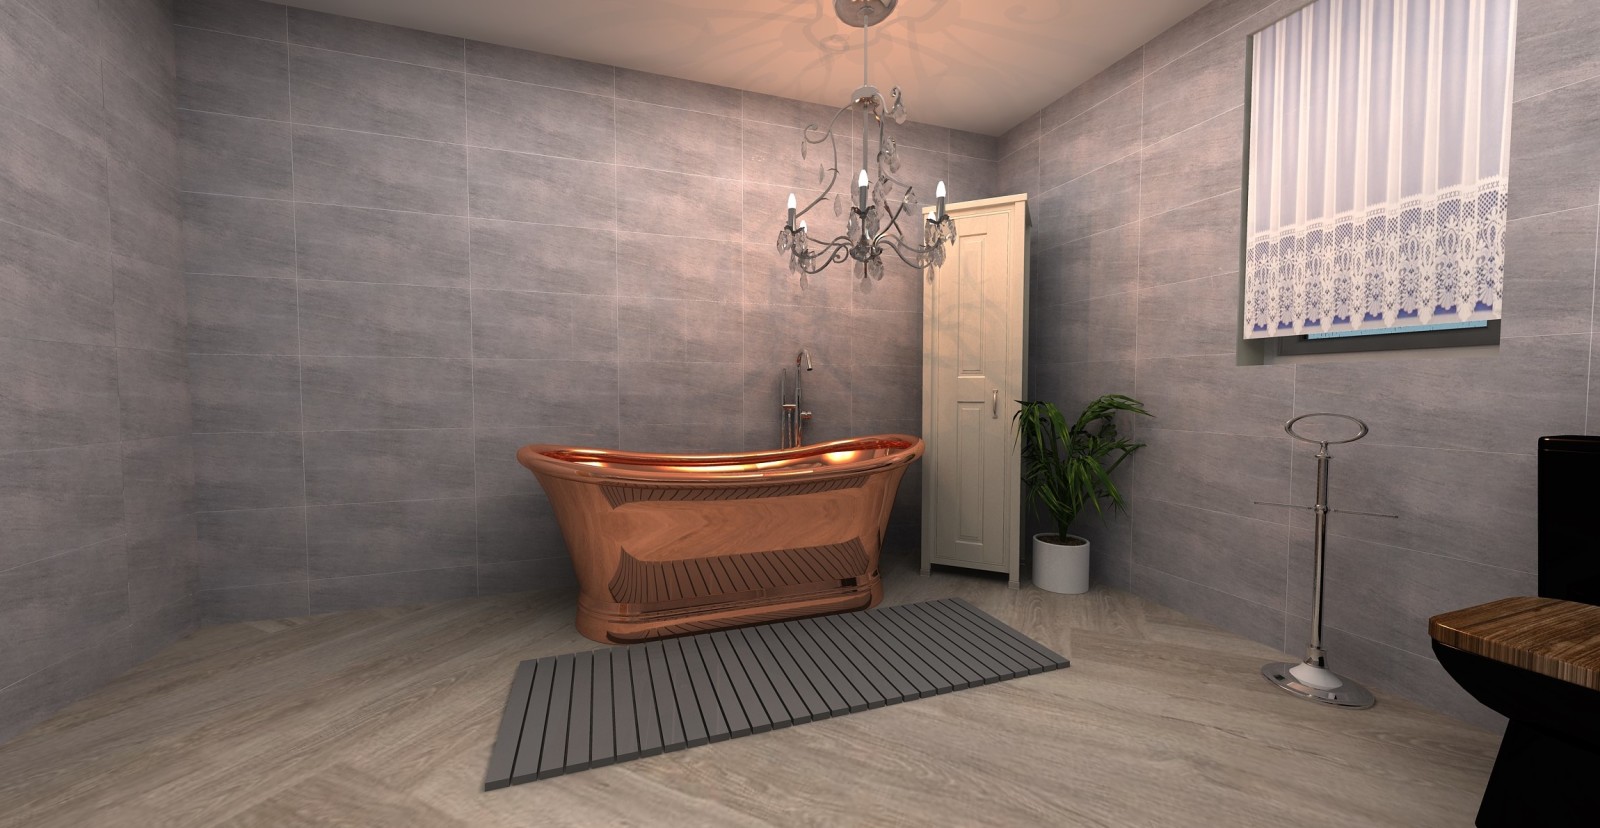 Digital lifestyle image of a bathroom designed using the Sanctuary Bathrooms' 3D design tool, featuring a copper boat bath, a wooden bath mat, a floorstanding bathroom cabinet, a chandelier, wooden flooring and grey tiled walls